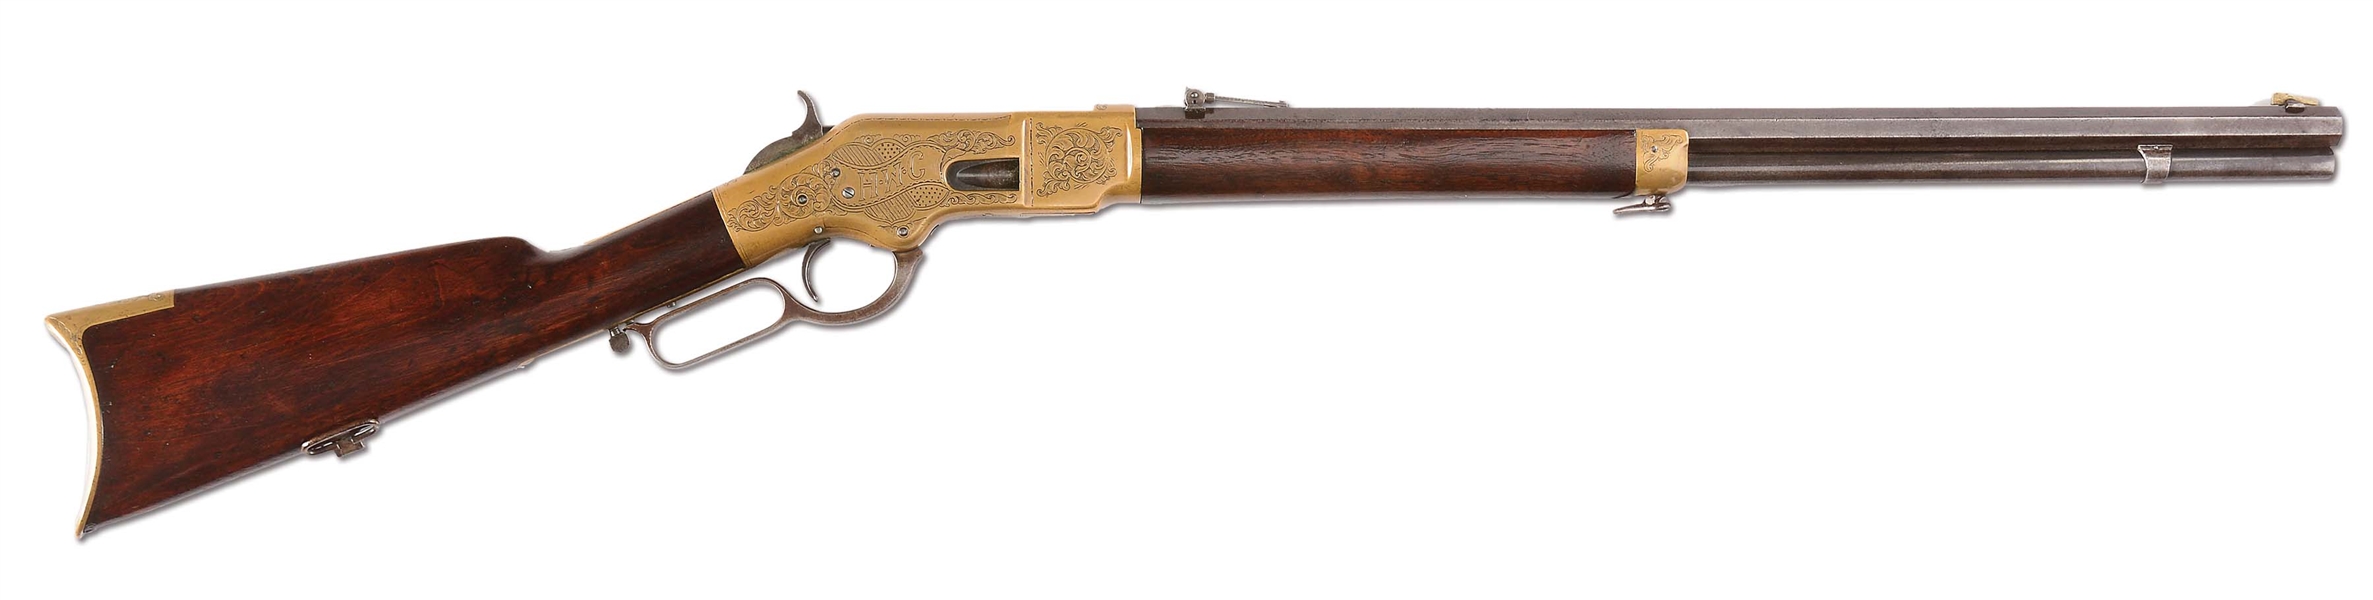 (A) ENGRAVED WINCHESTER 1866 THIRD MODEL LEVER-ACTION RIFLE (1869).